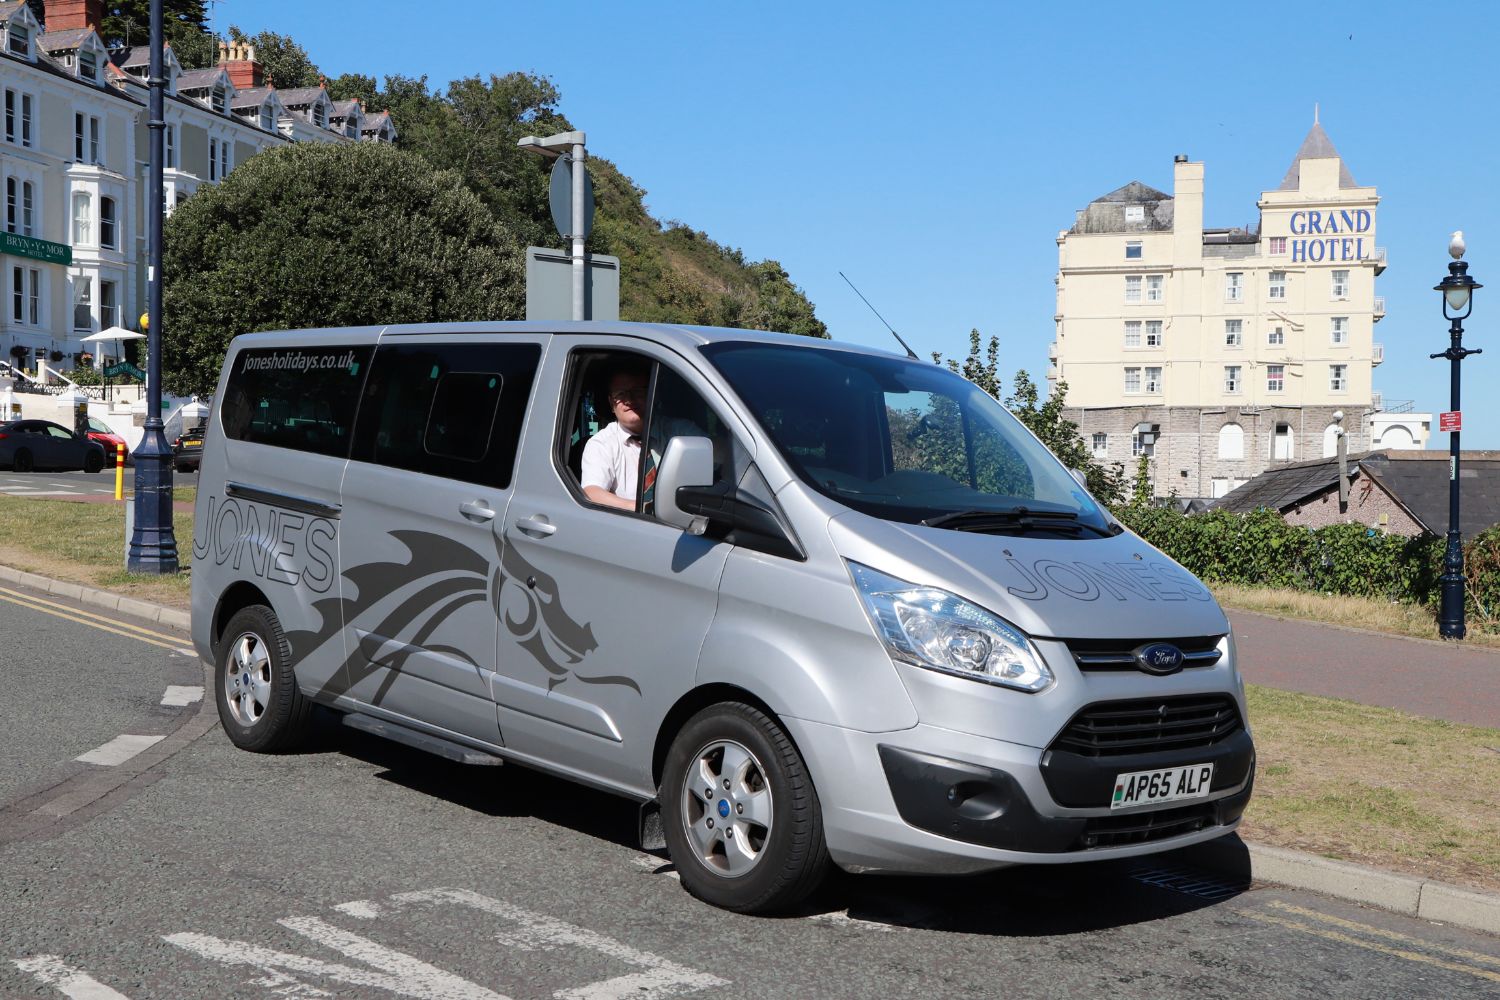 The Ford Tourneos used for the door to door element of the Jones Holiday experience carry a silver version of the corporate livery. This example is seen at Llandudno Pier with one of Alpine Travel’s current driver trainees at the wheel